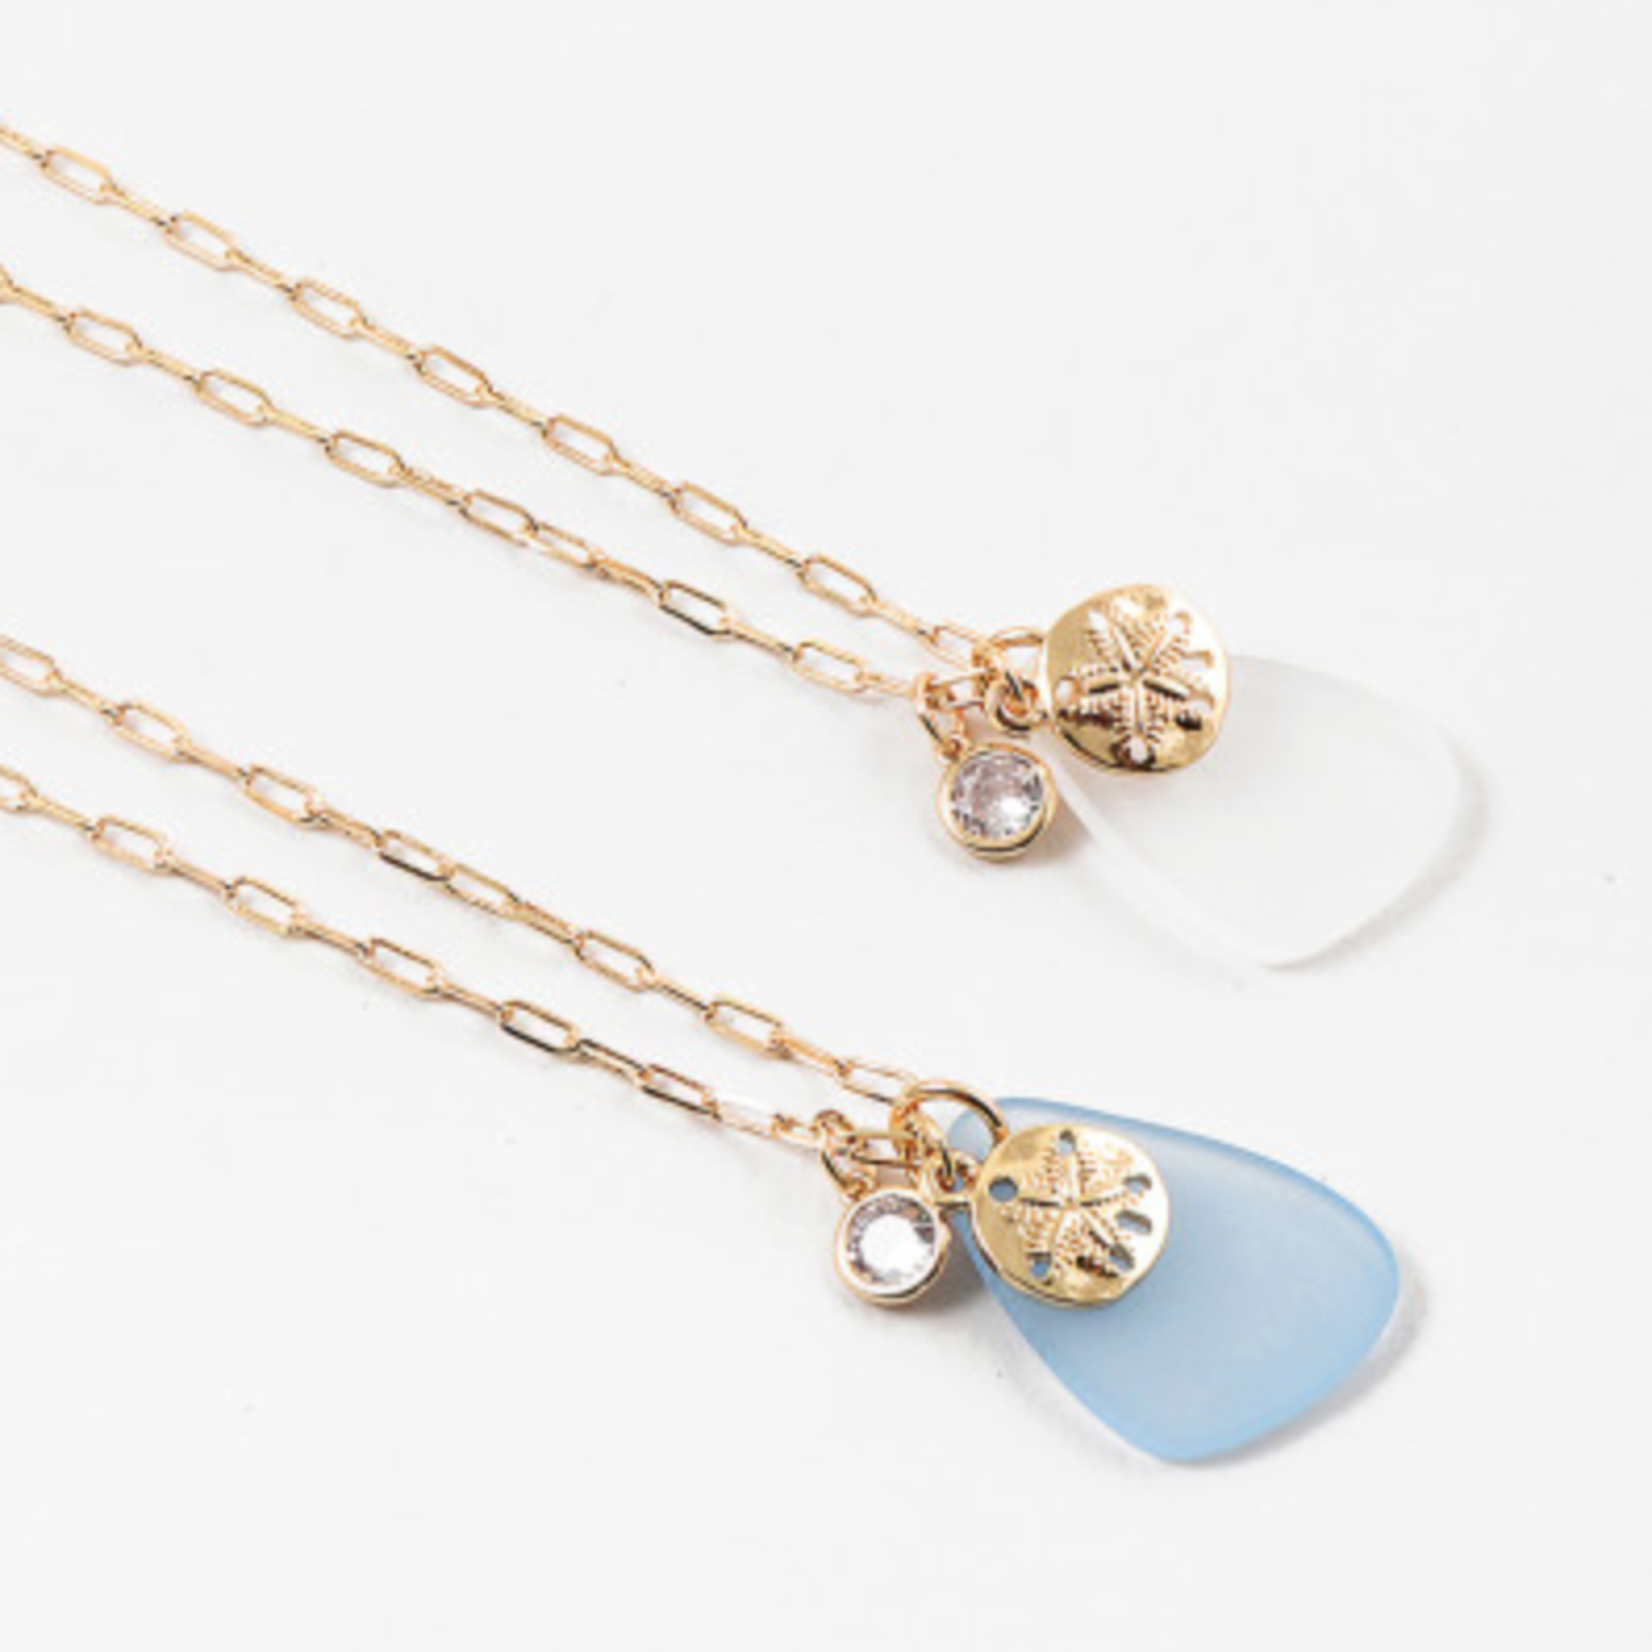 Gold Necklace w/ Seaglass and Charms